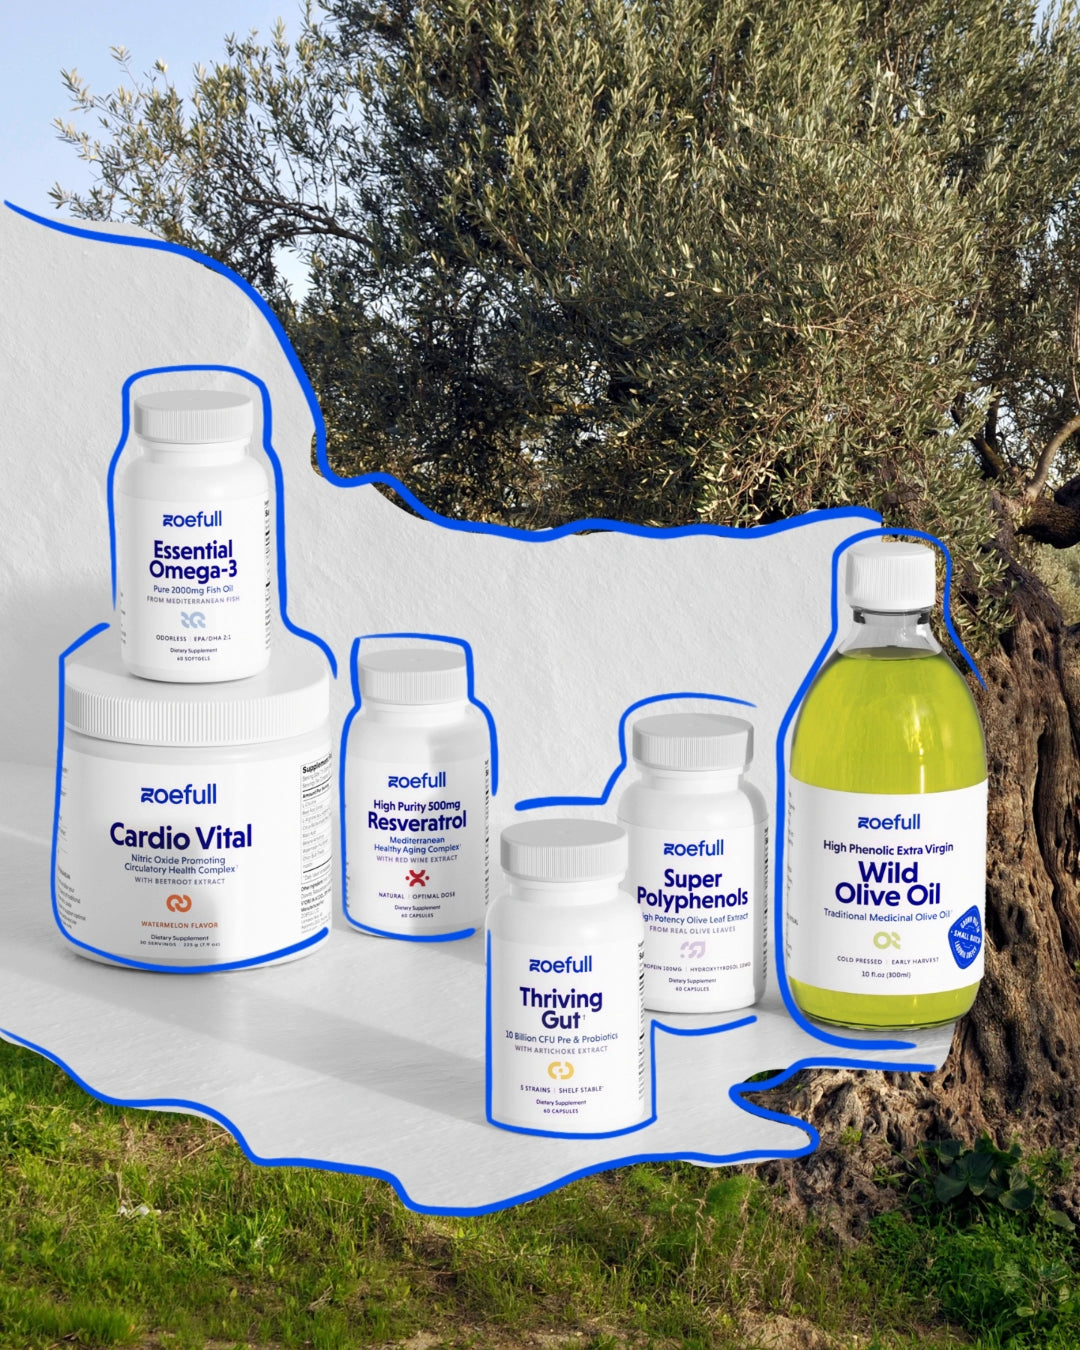 A design of the full collection of products by zoefull. It feautres the following products: wild olive oil, essential omega 3, thriving gut, cardio vital, super polyphenols and resveratrol.